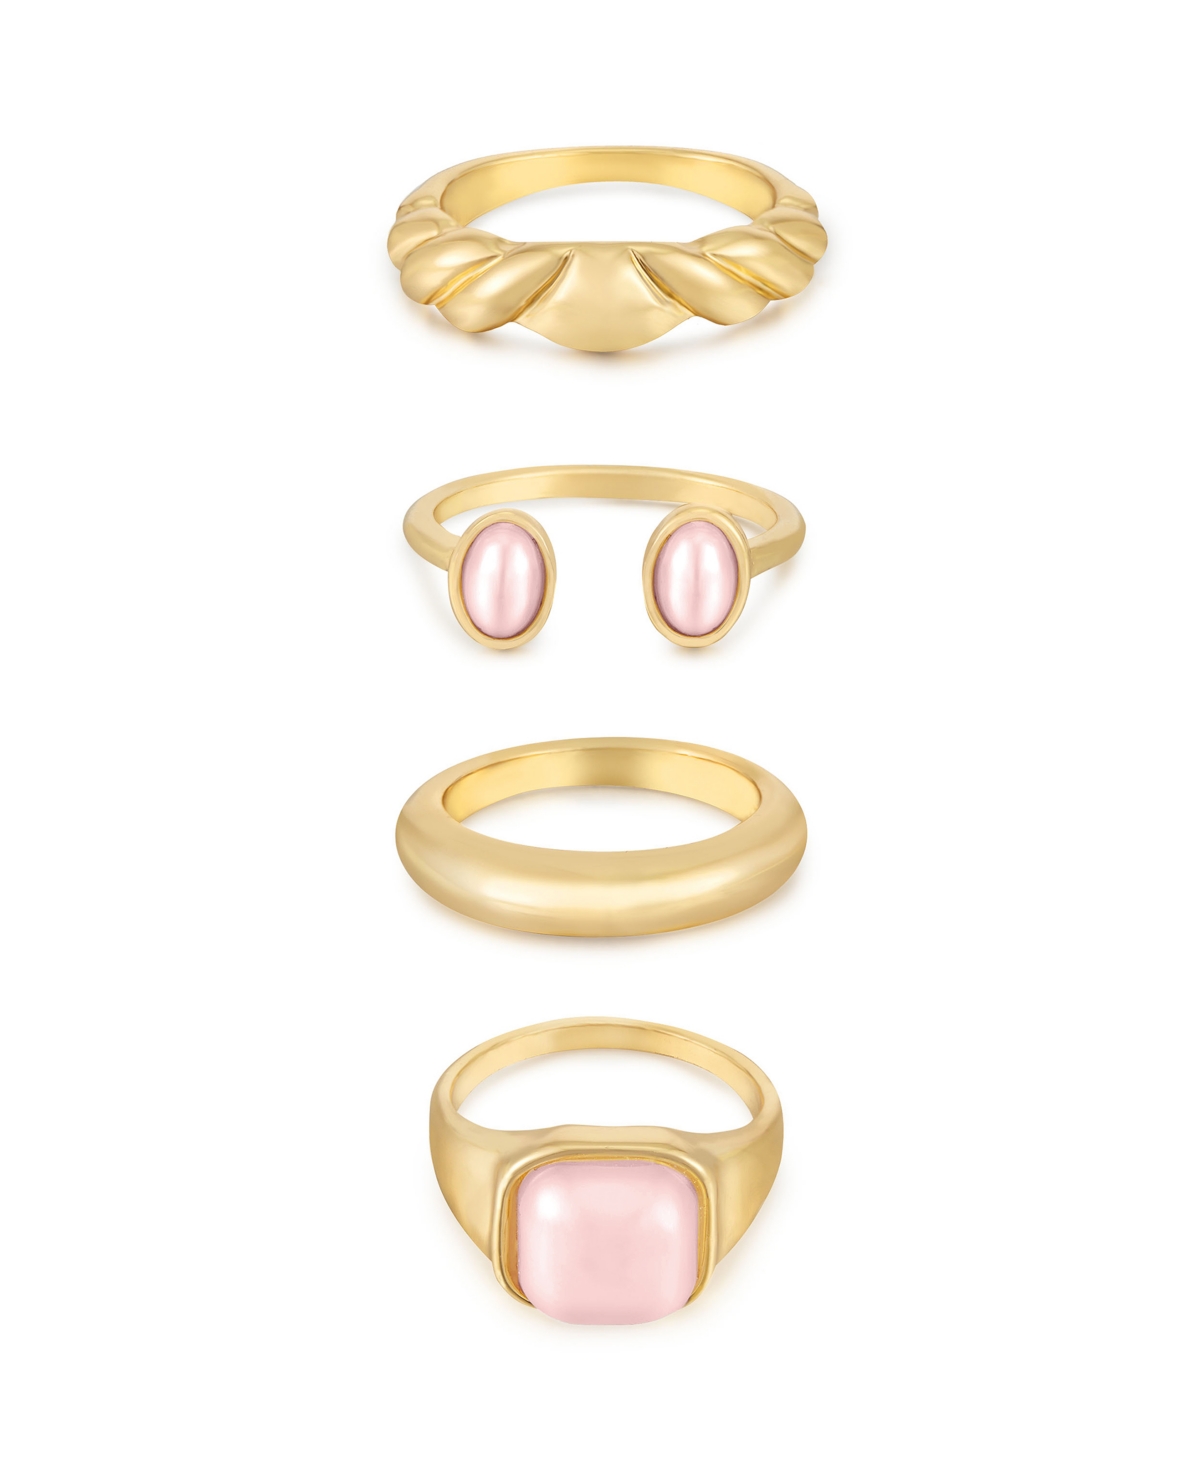 Ultimate Babe 18k Gold Plated Ring Set - Pink